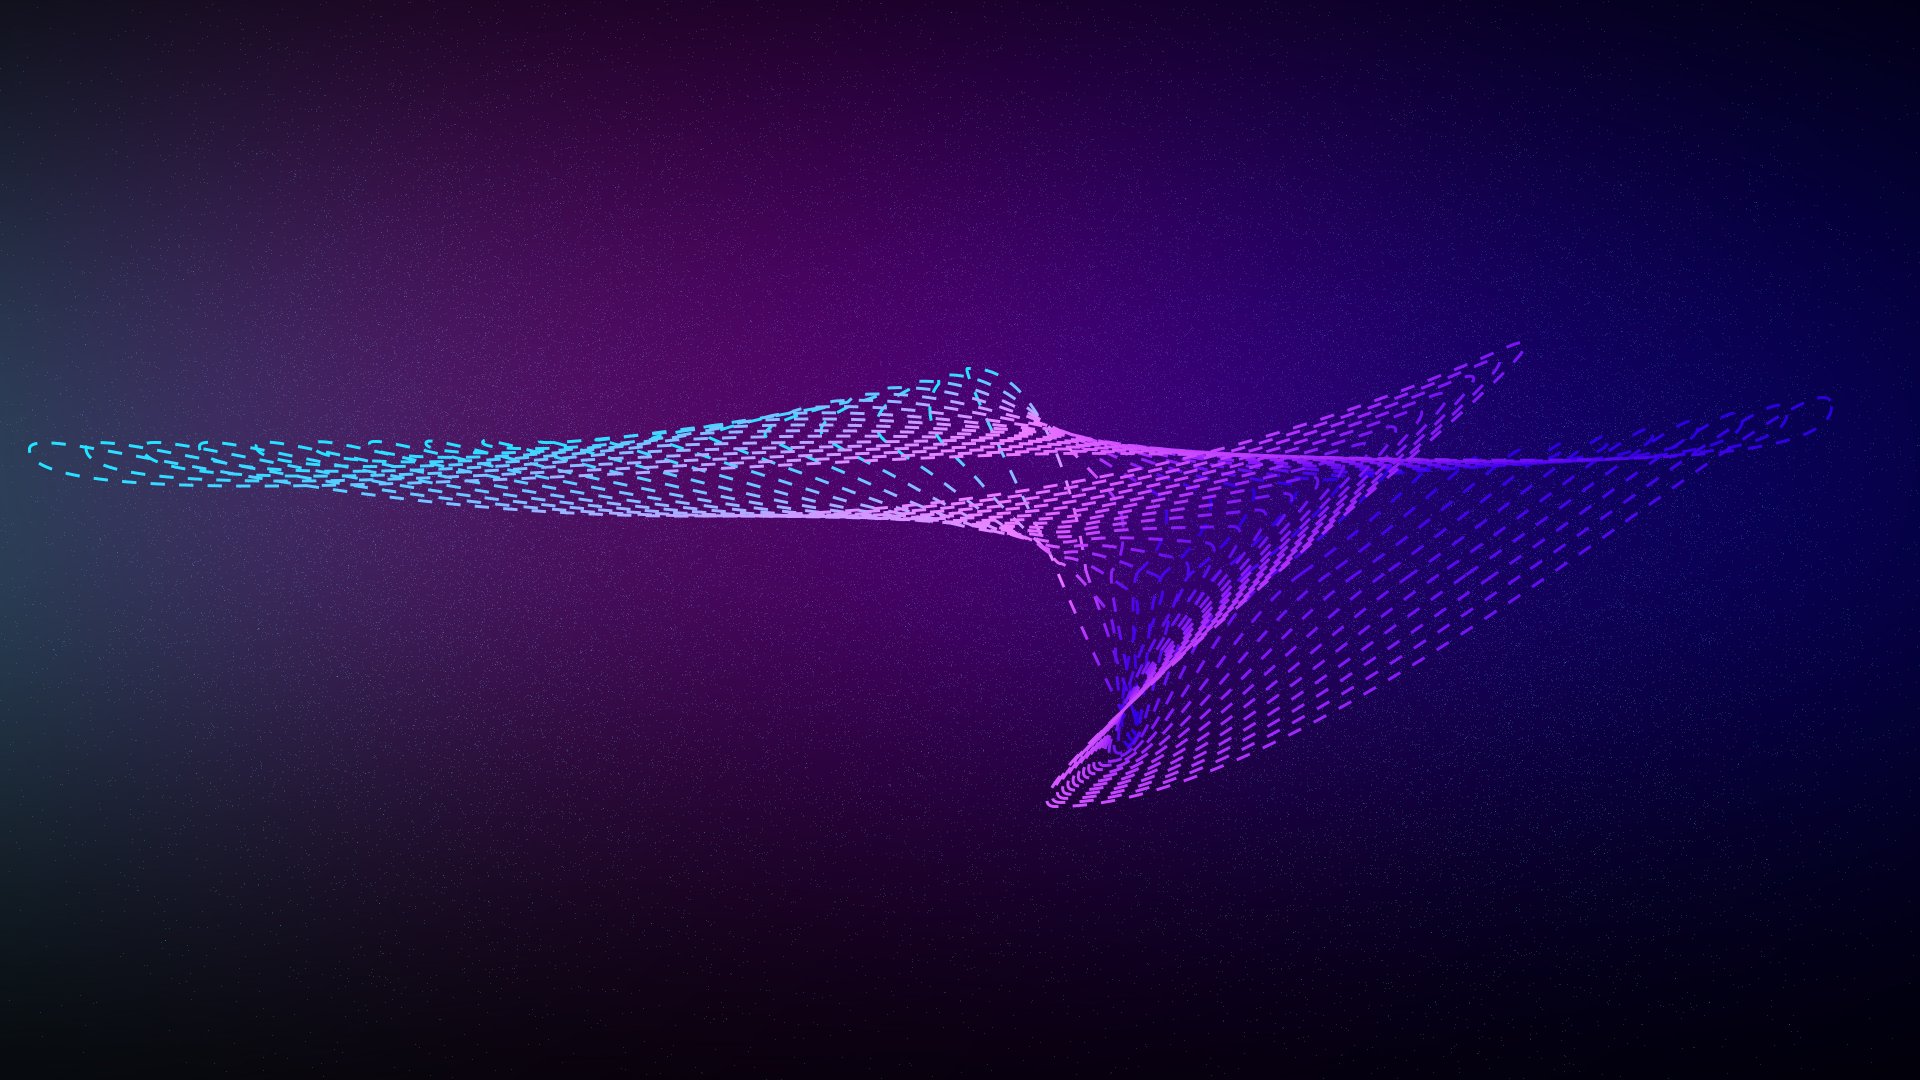 Abstract Wave 4k Ultra HD Wallpaper by 3DART